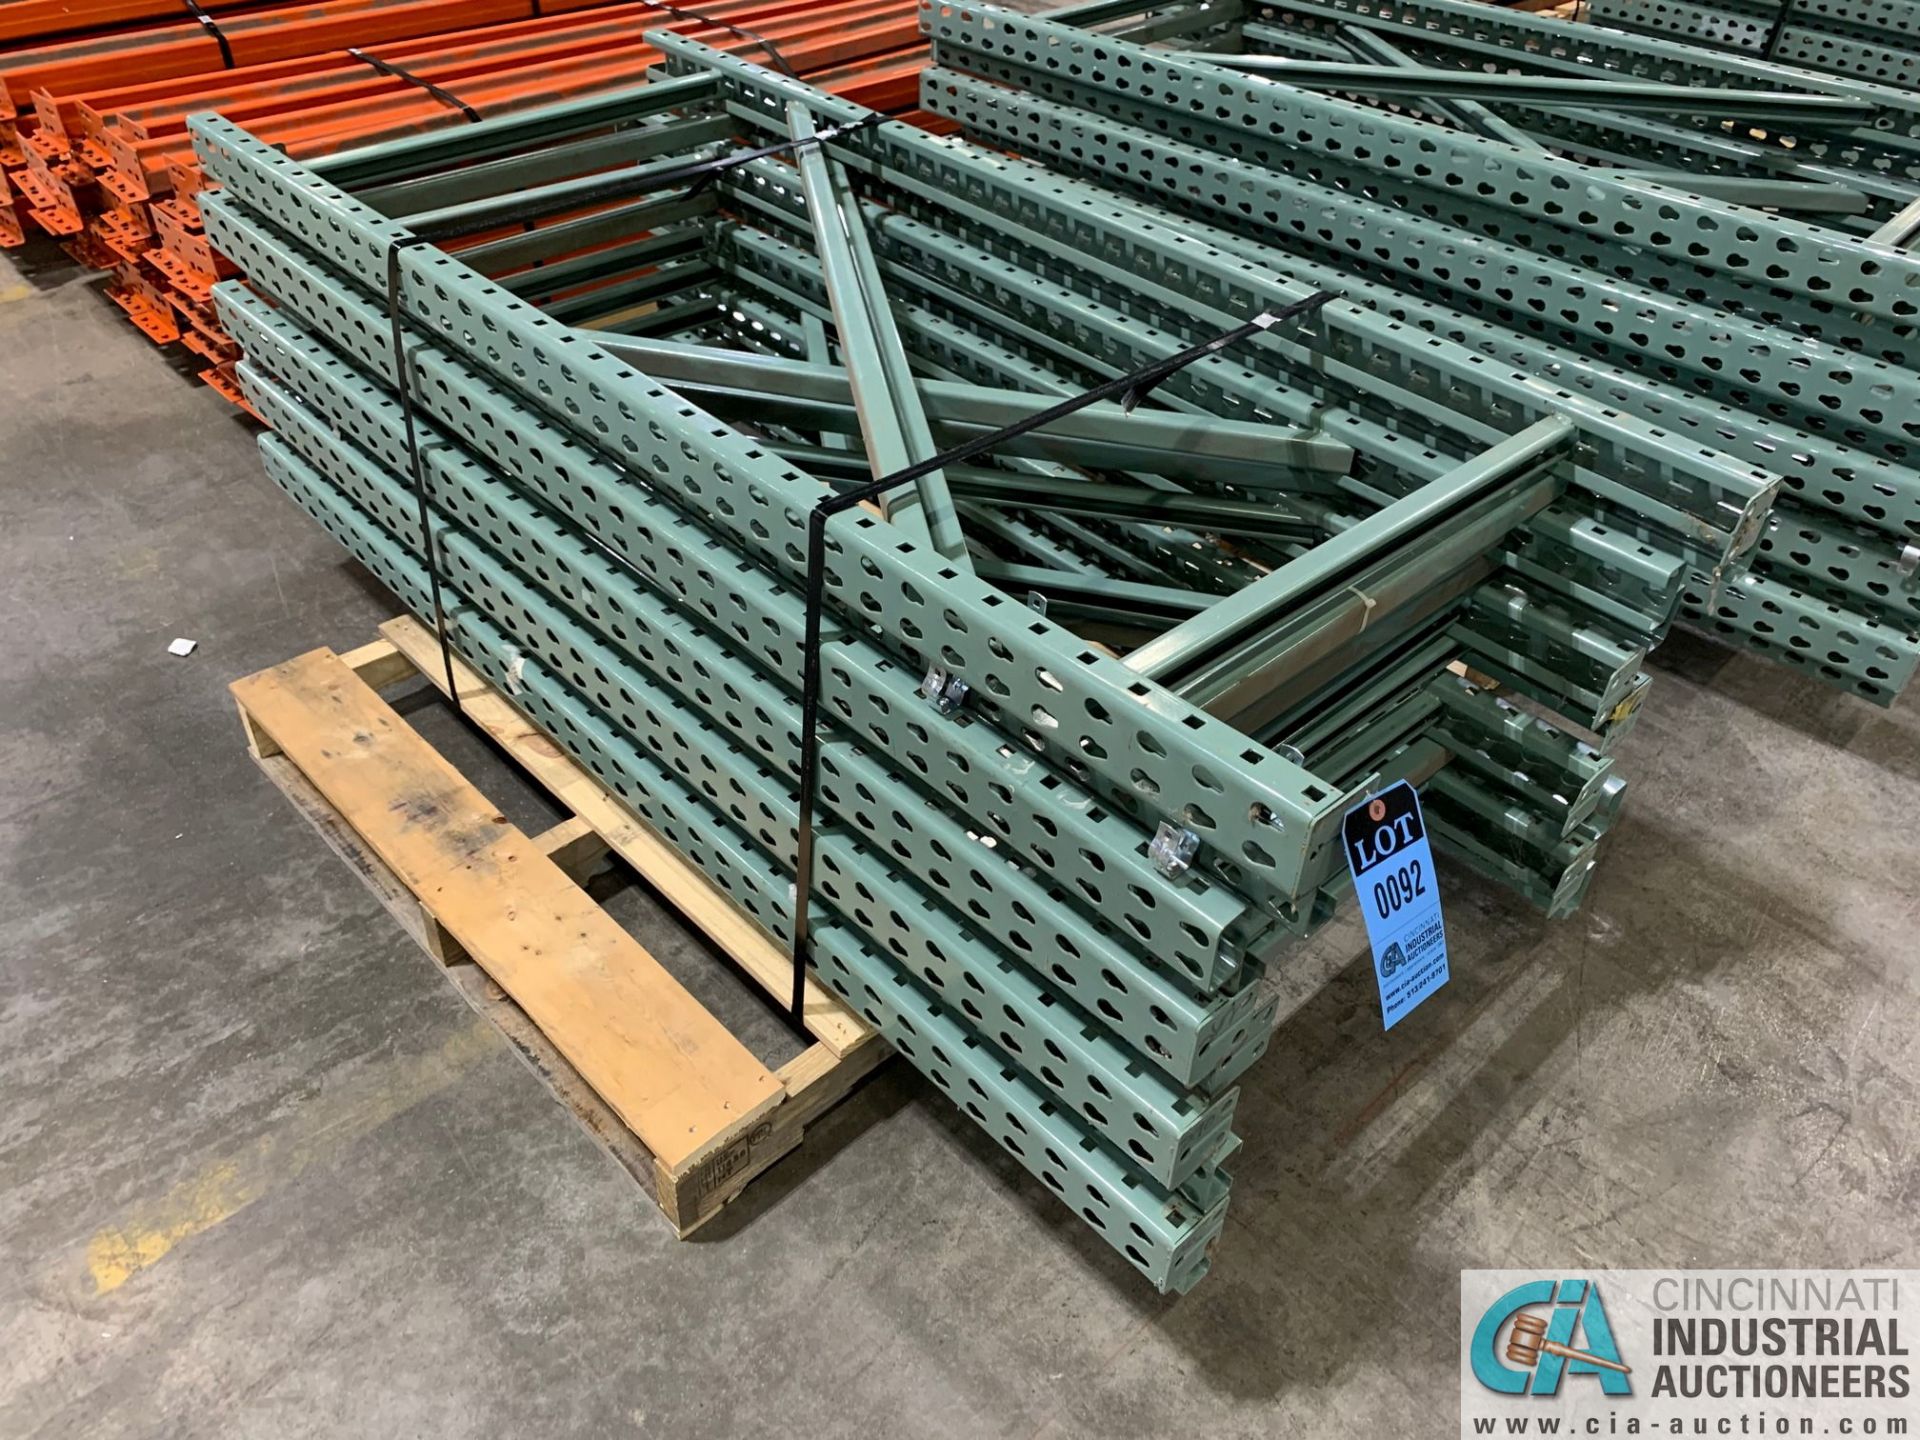 FREE-STANDING SECTIONS 30" X 72" X 72" HIGH ADJUSTABLE BEAM WIRE DECK PALLET RACK CONSISTING OF - Image 3 of 6